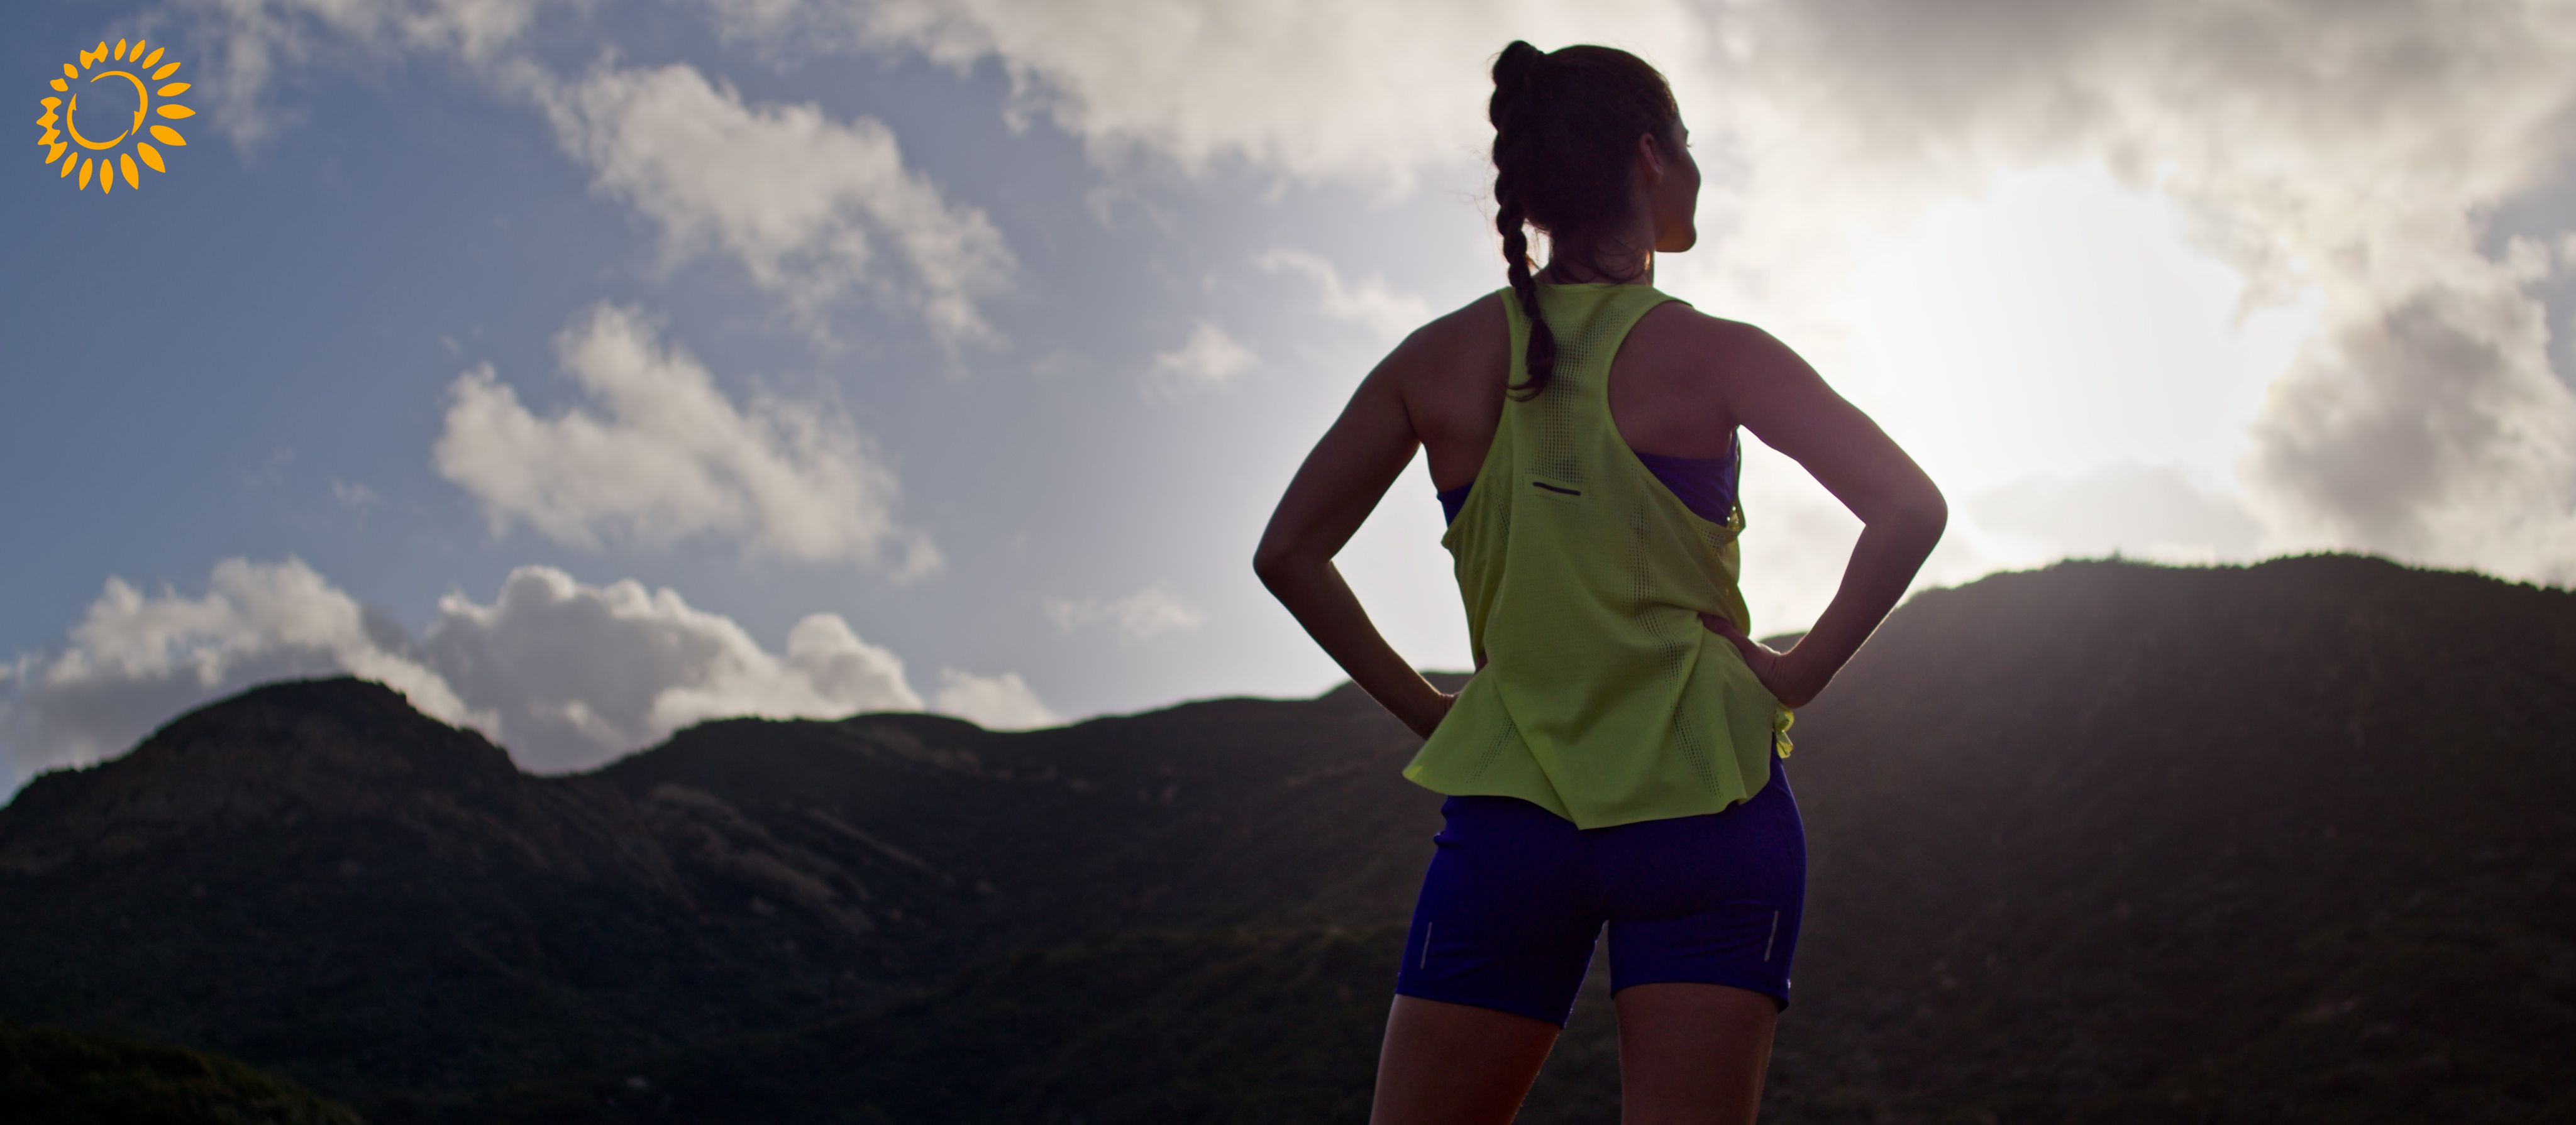 Woman looks out over a cliff sunset wearing ASICS sustainable apparel.